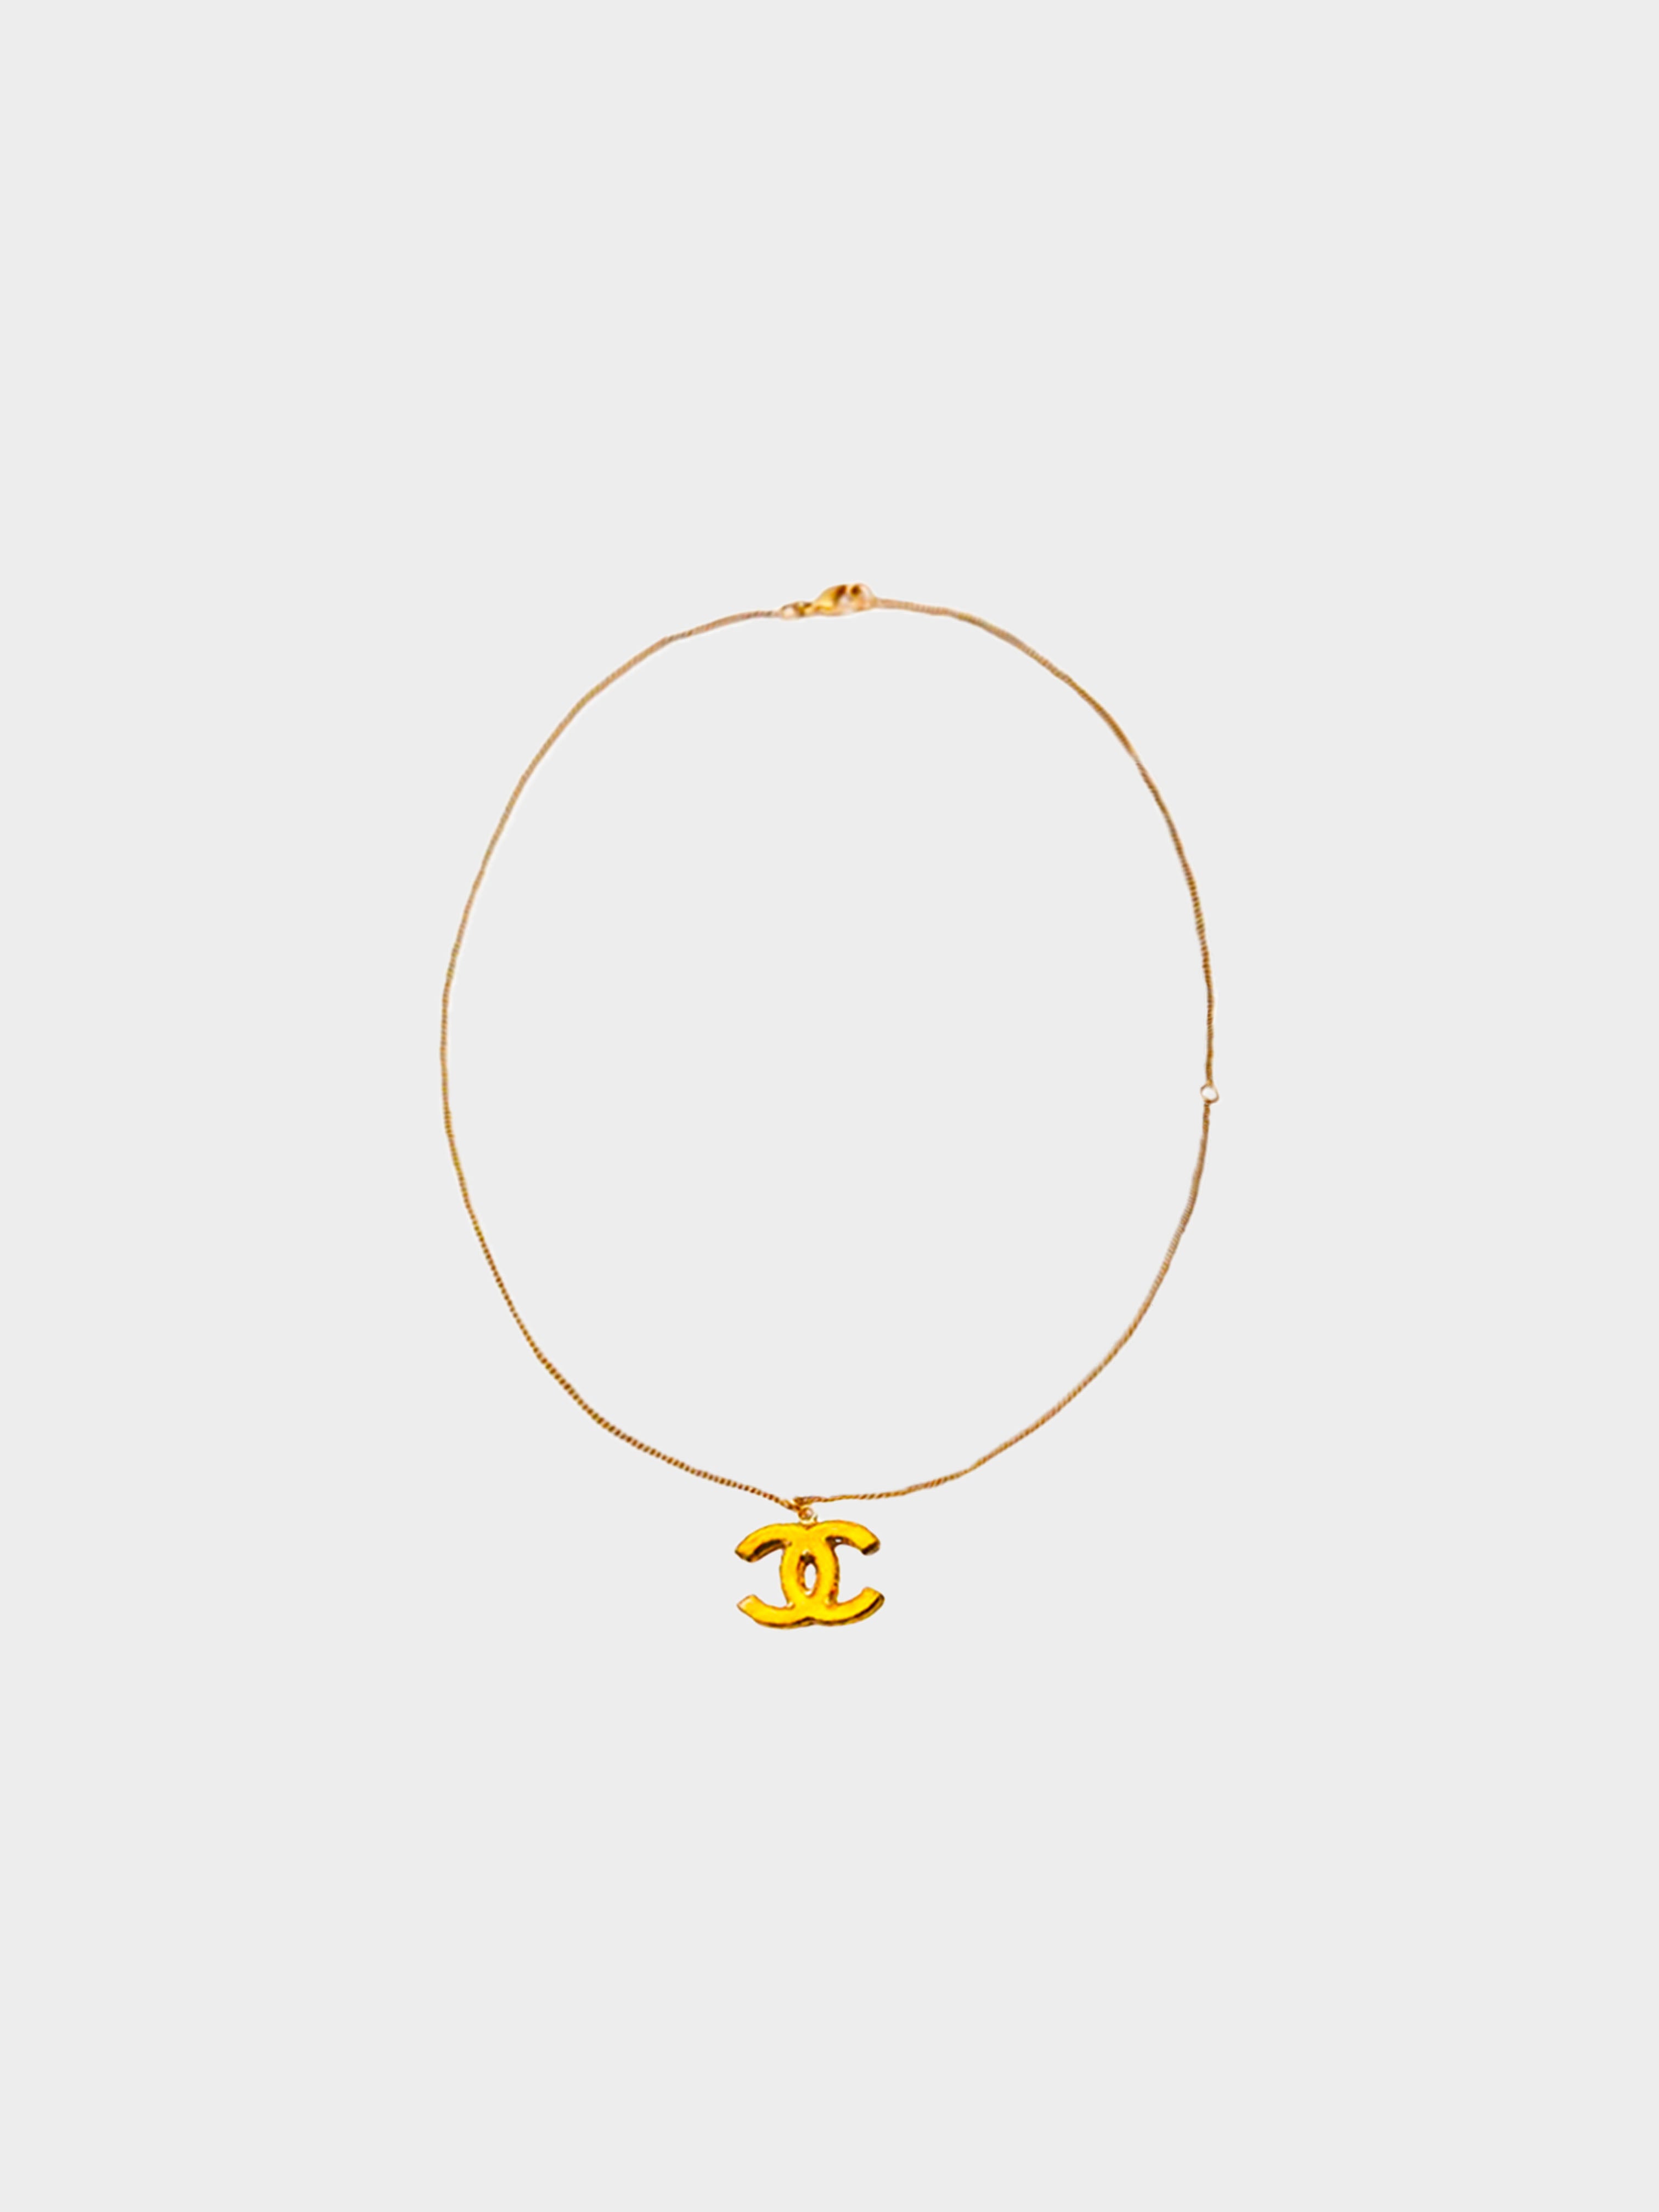 Chanel 2012 Gold CC Choker Necklace